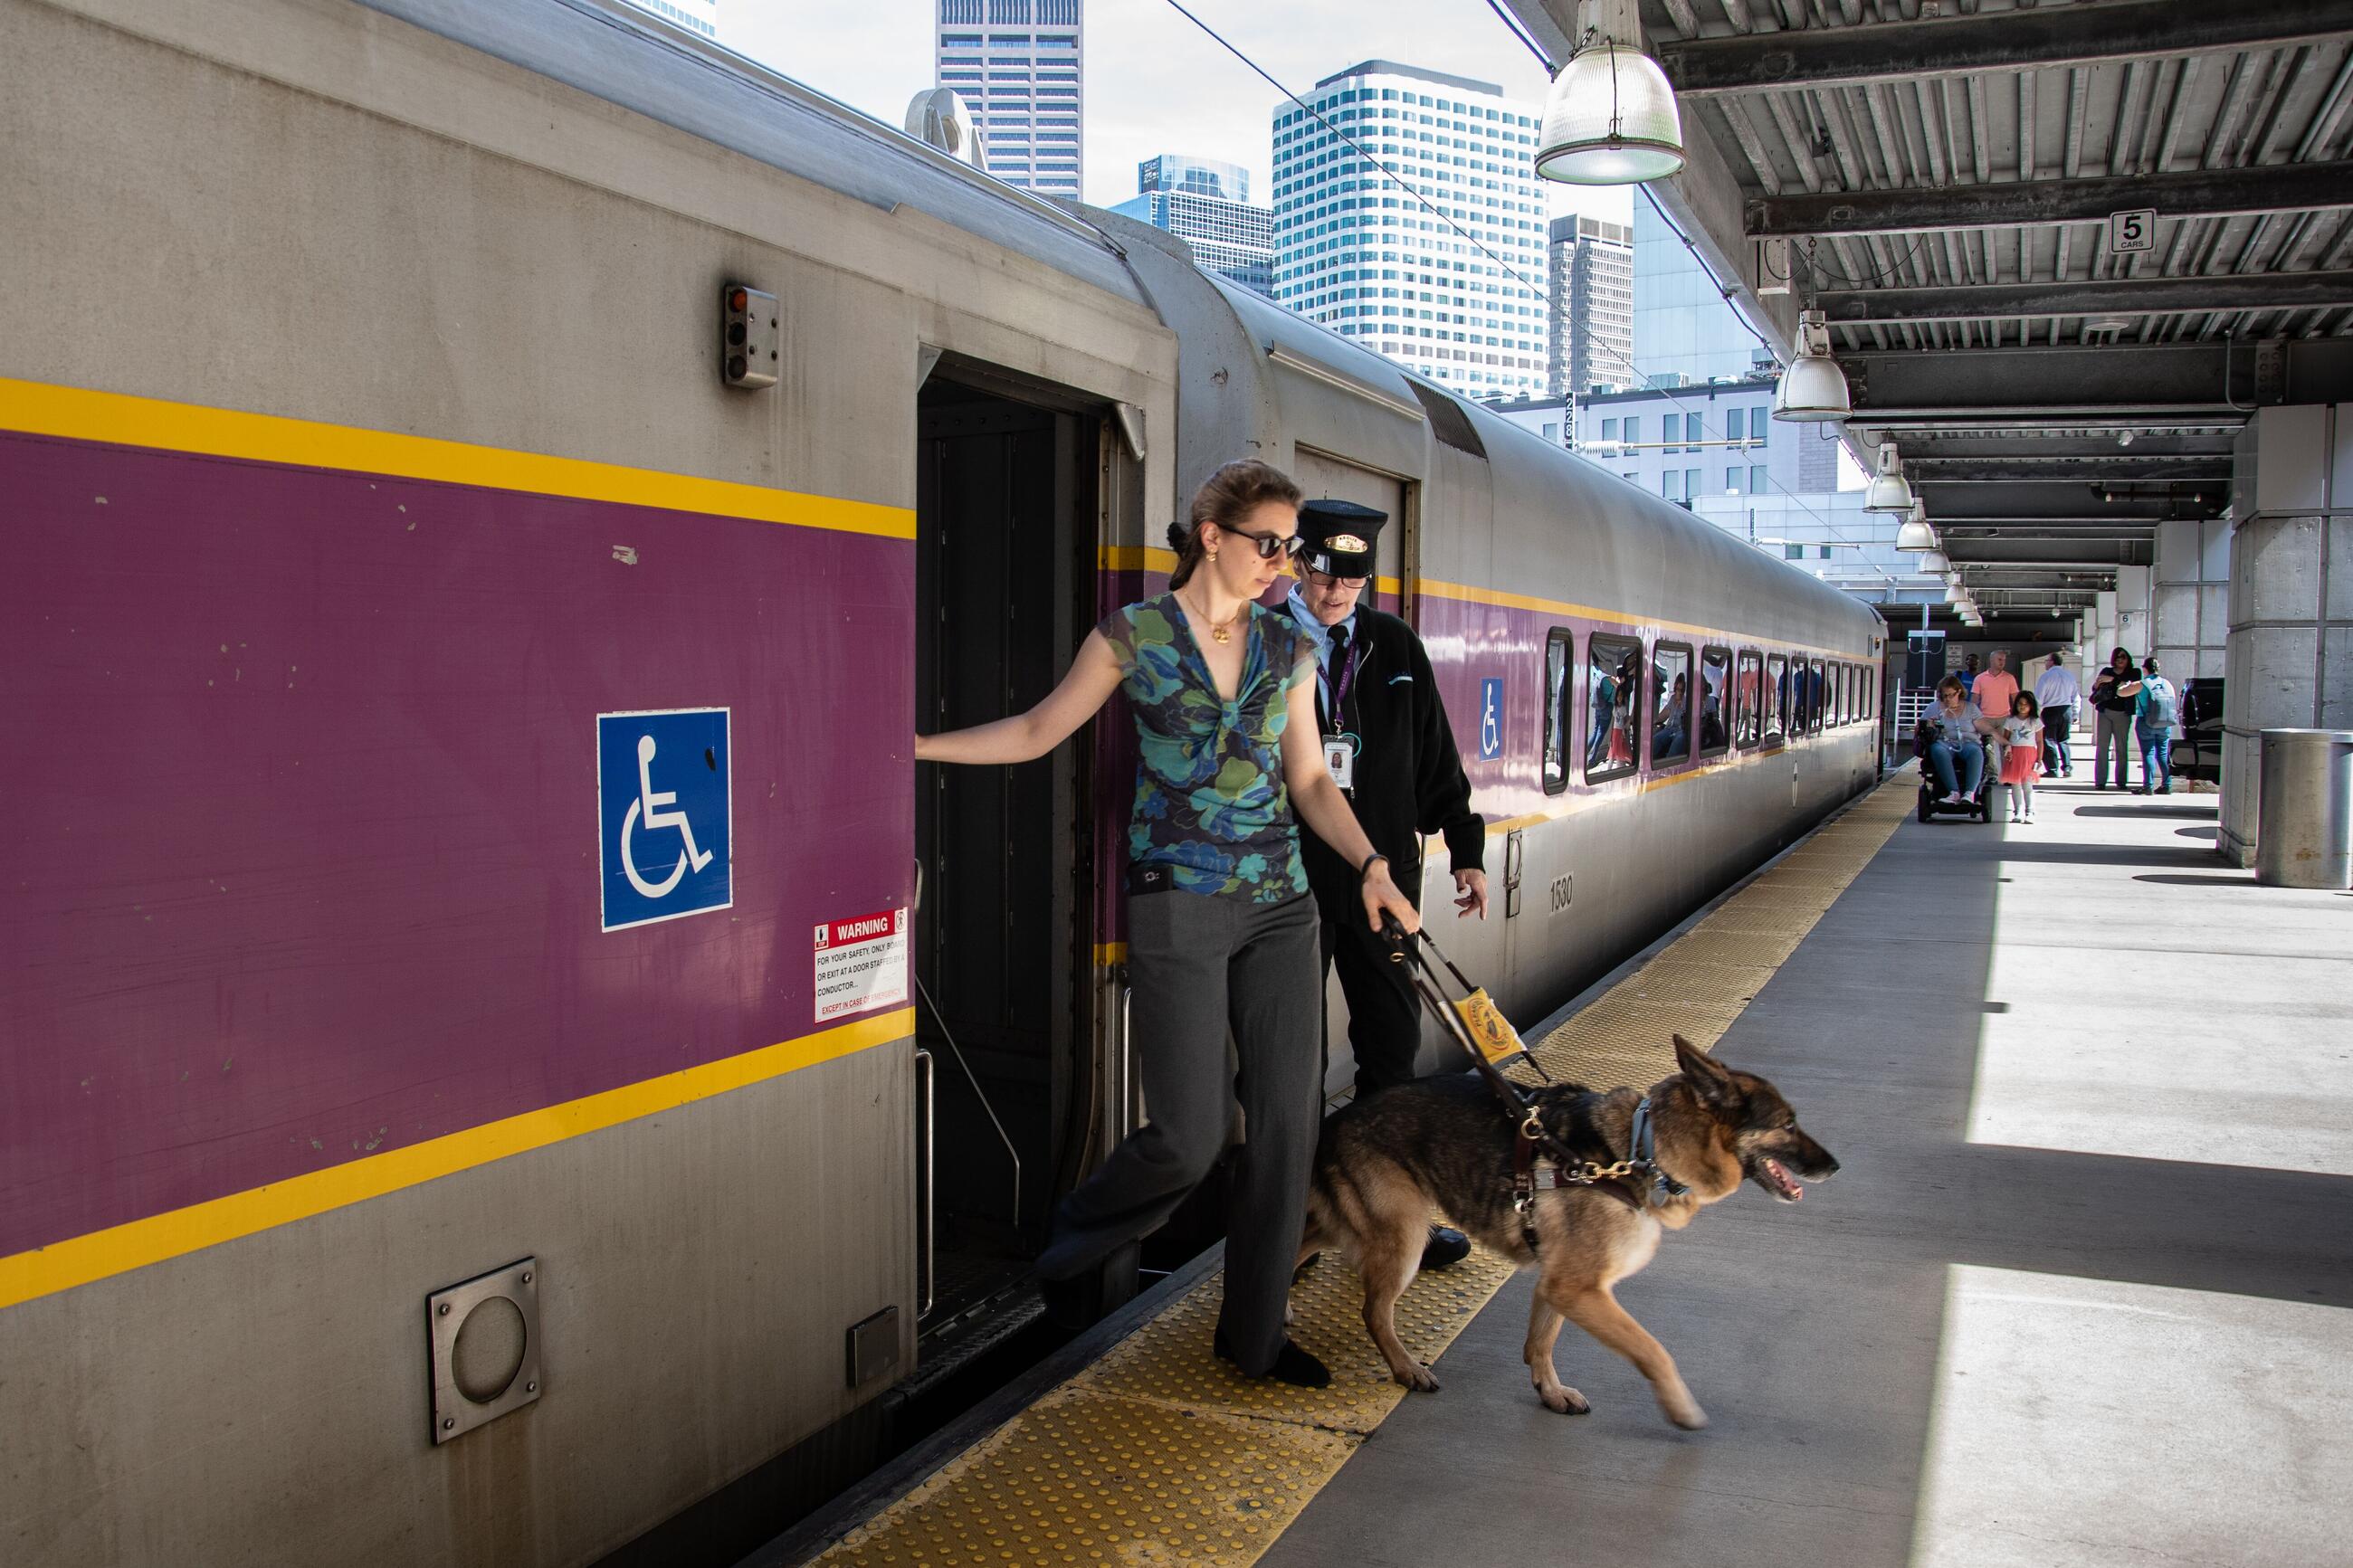 A rider, accompanied by a guide dog, exits a commuter rail train onto a South Station platform